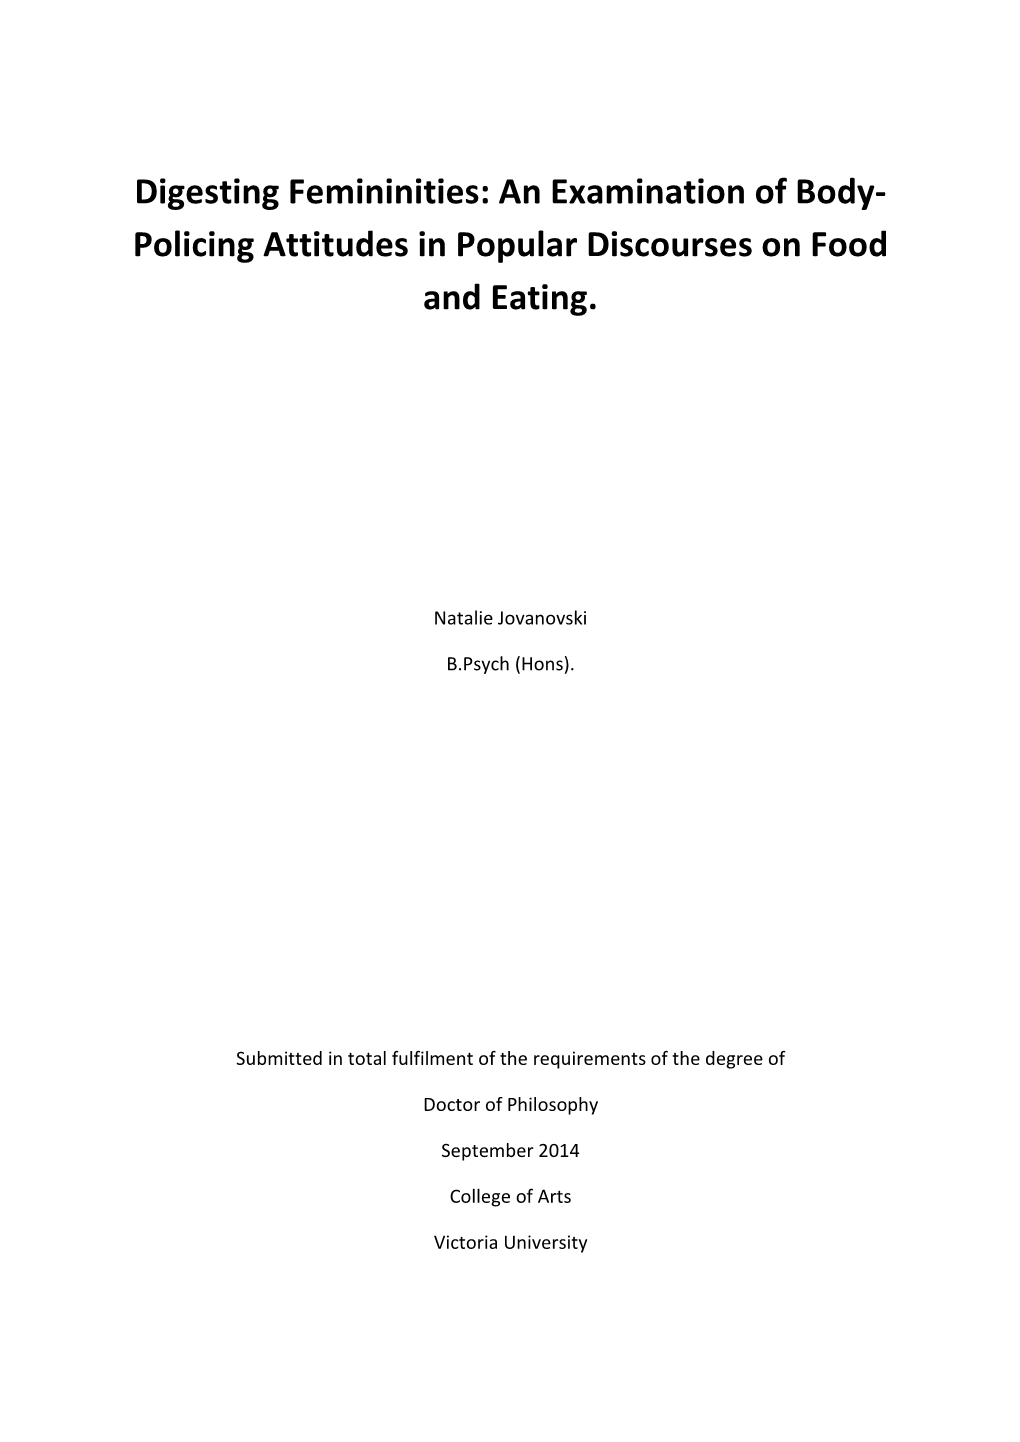 Policing Attitudes in Popular Discourses on Food and Eating